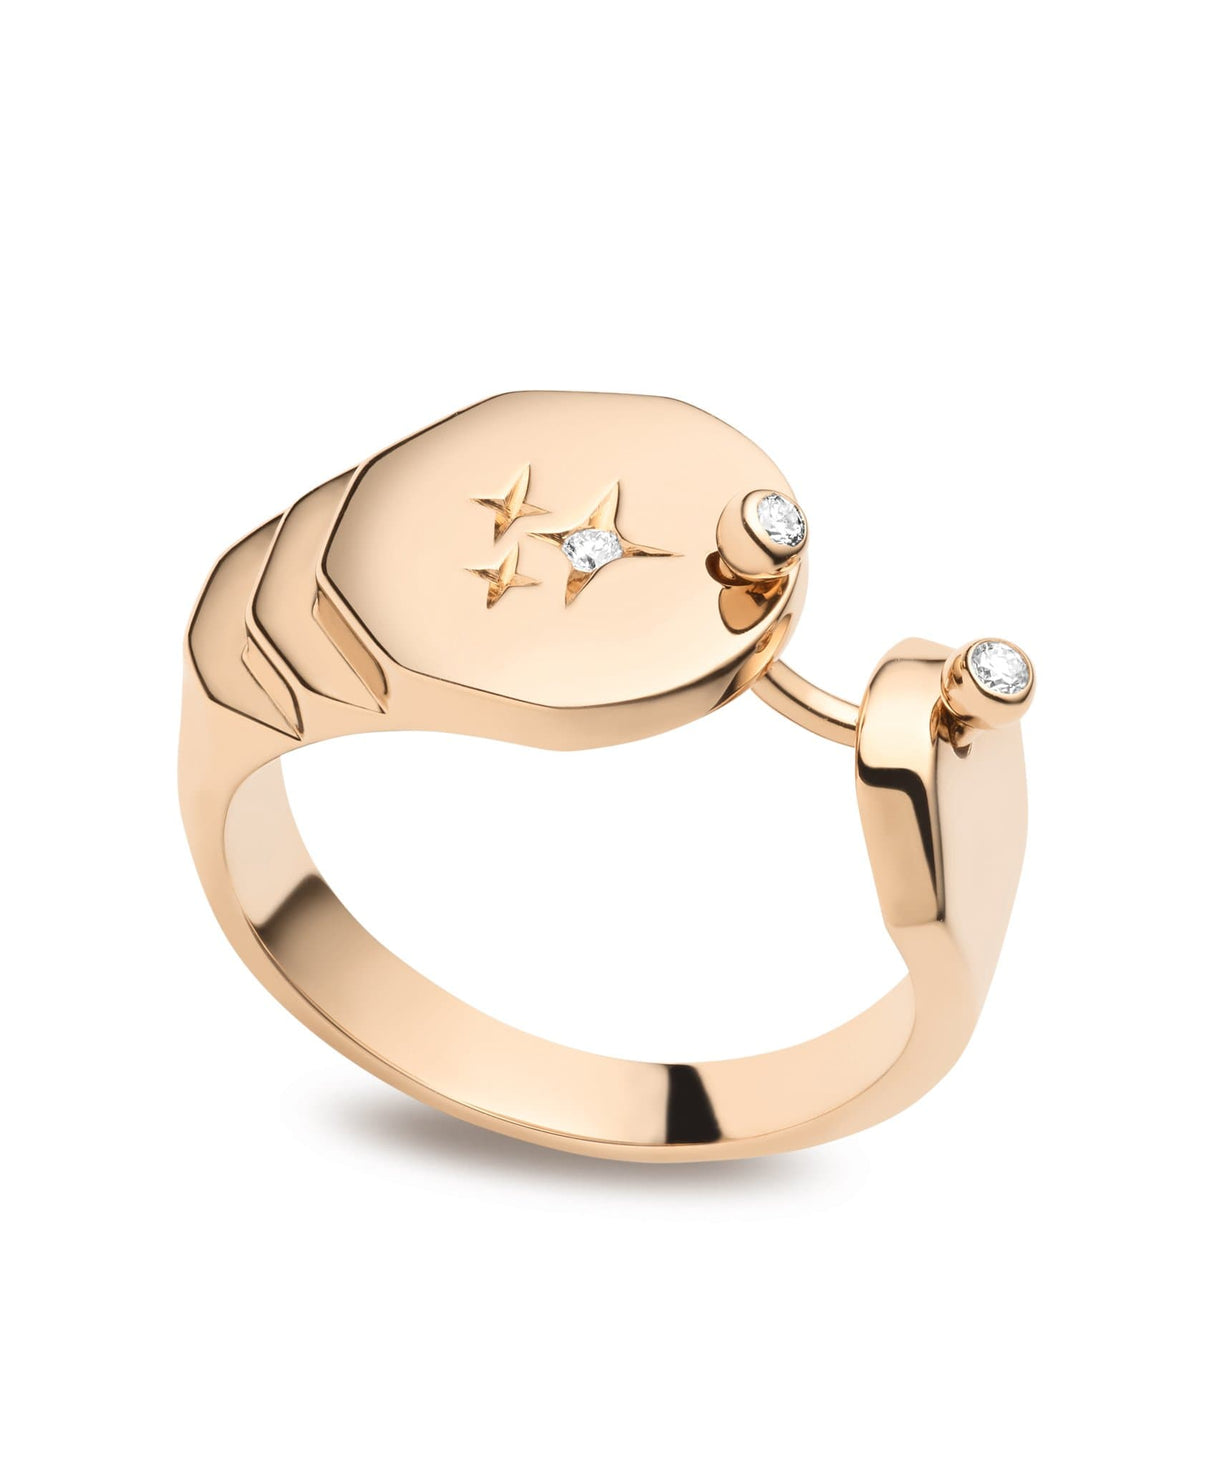 Sparkles Gold Ring: Discover Luxury Fine Jewelry | Nouvel Heritage